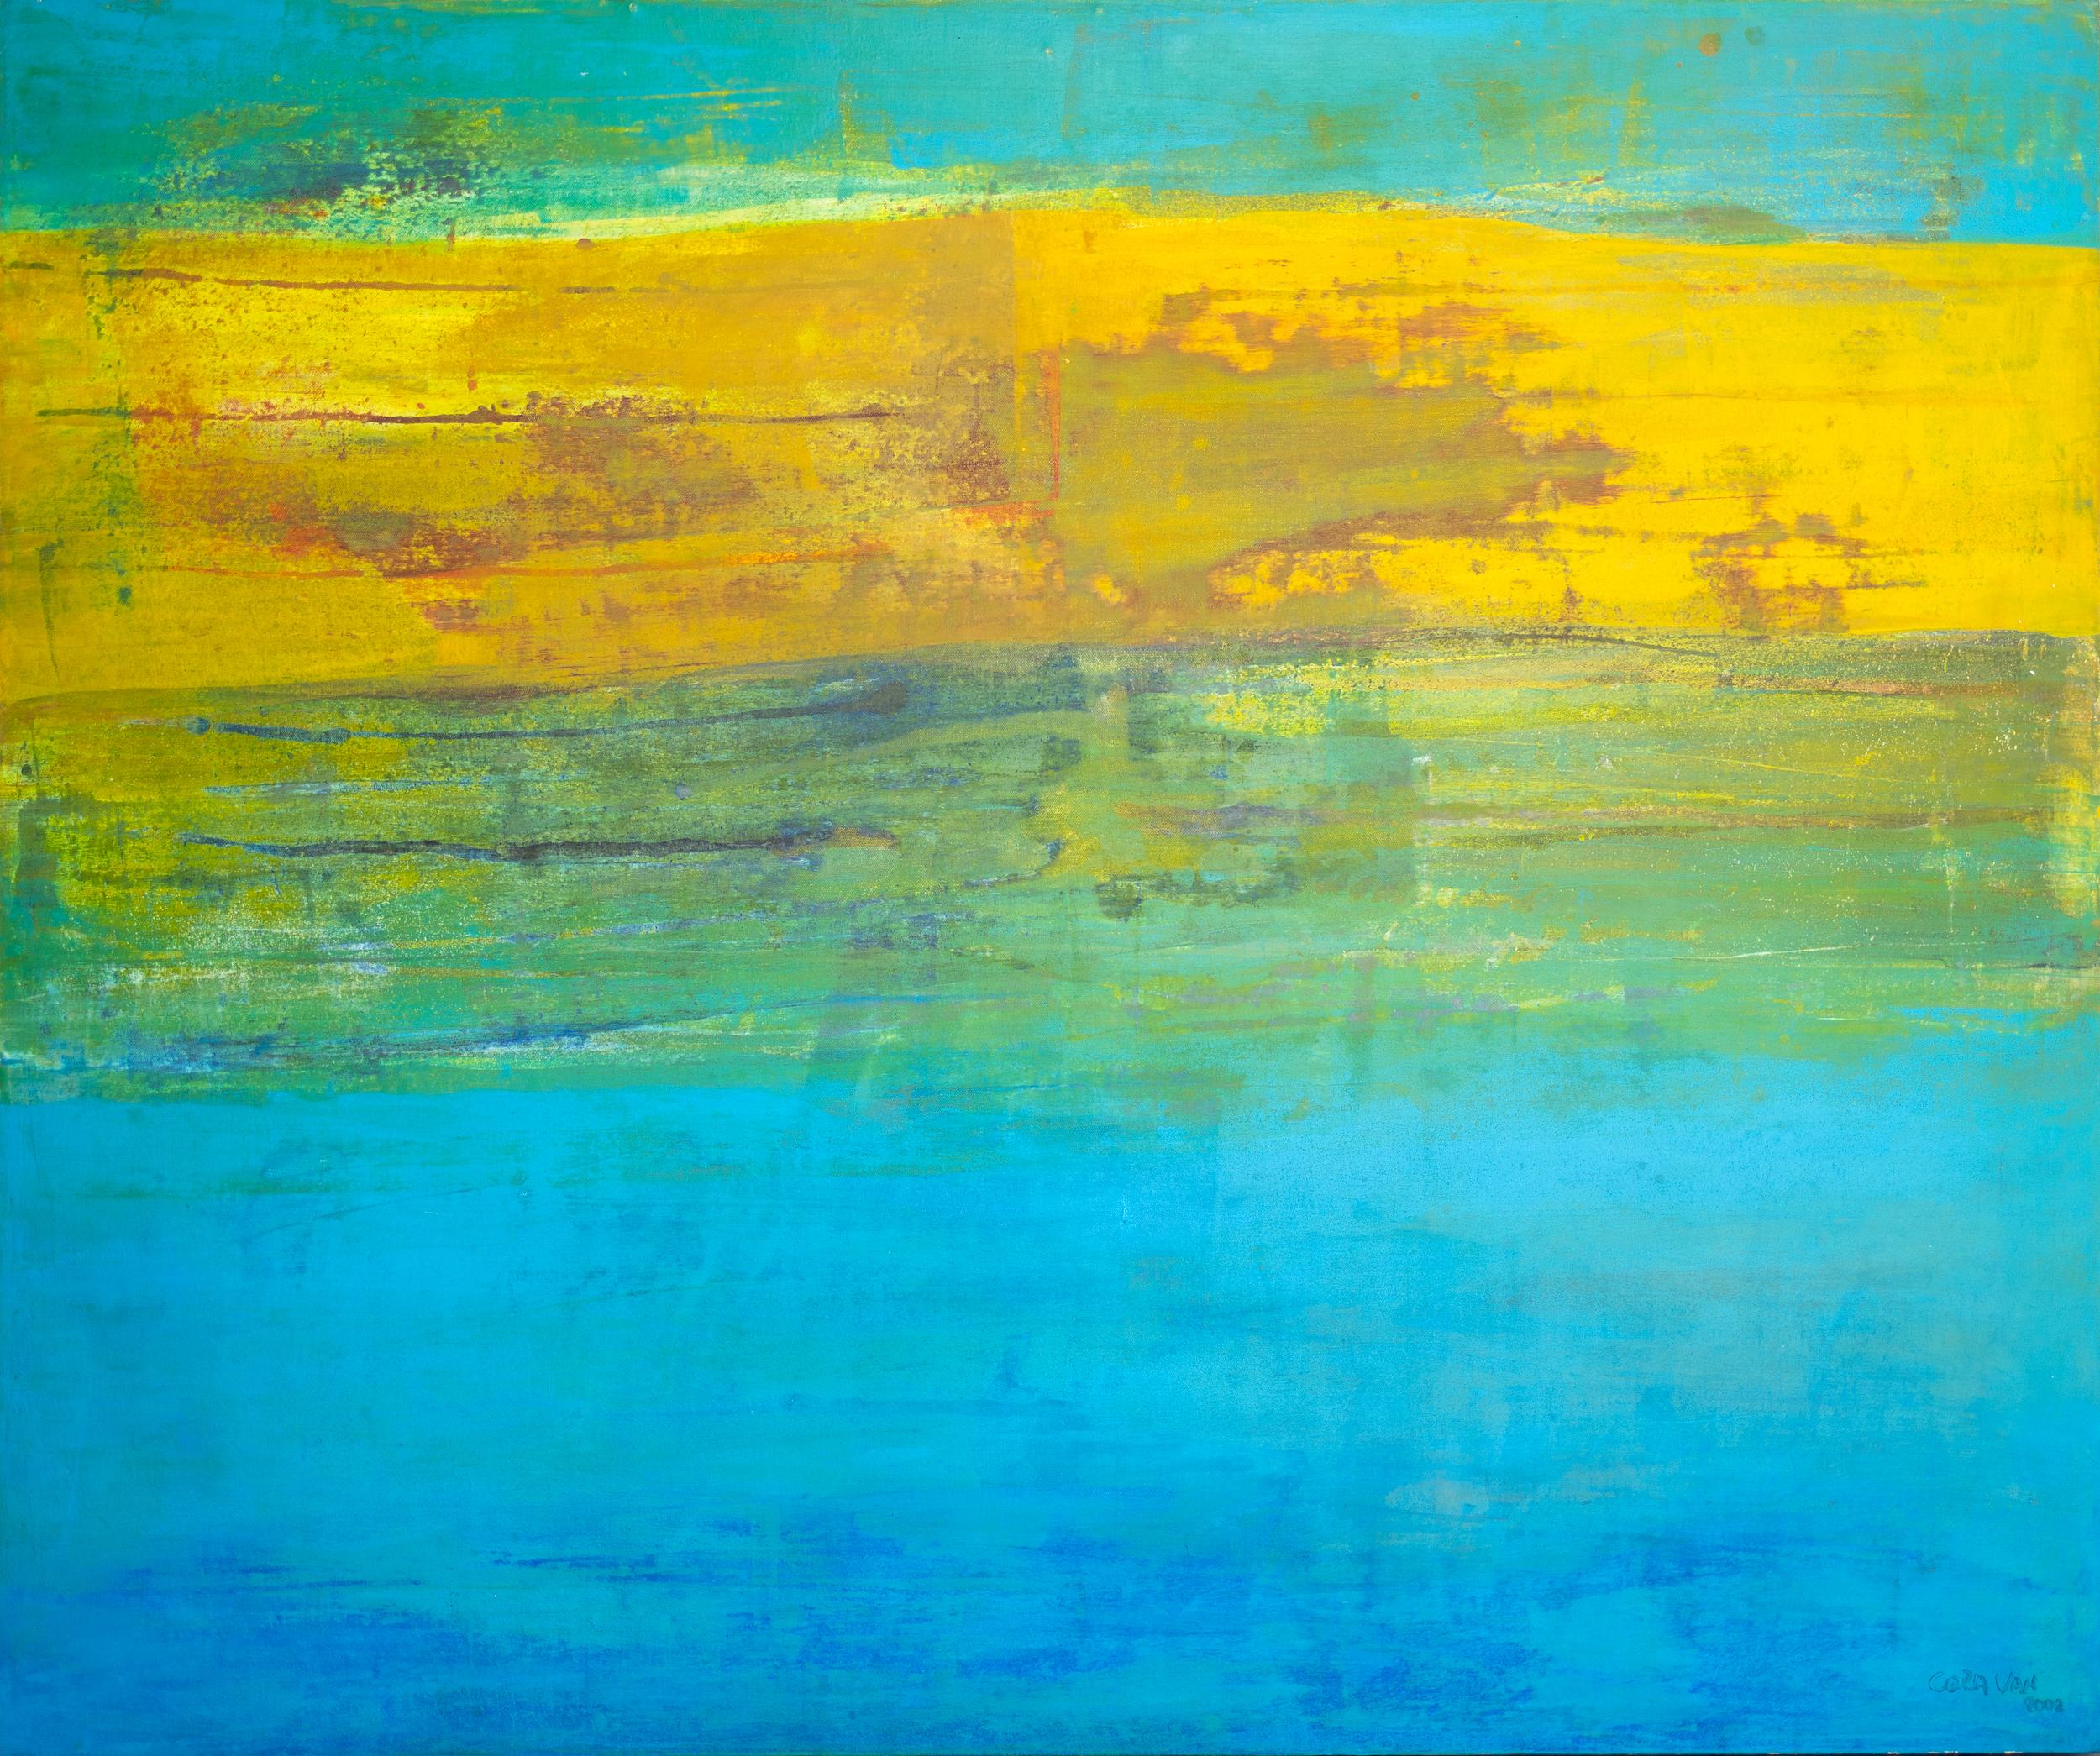 Cora Van Abstract Painting - Blue, Green, and Yellow Gestural Abstract